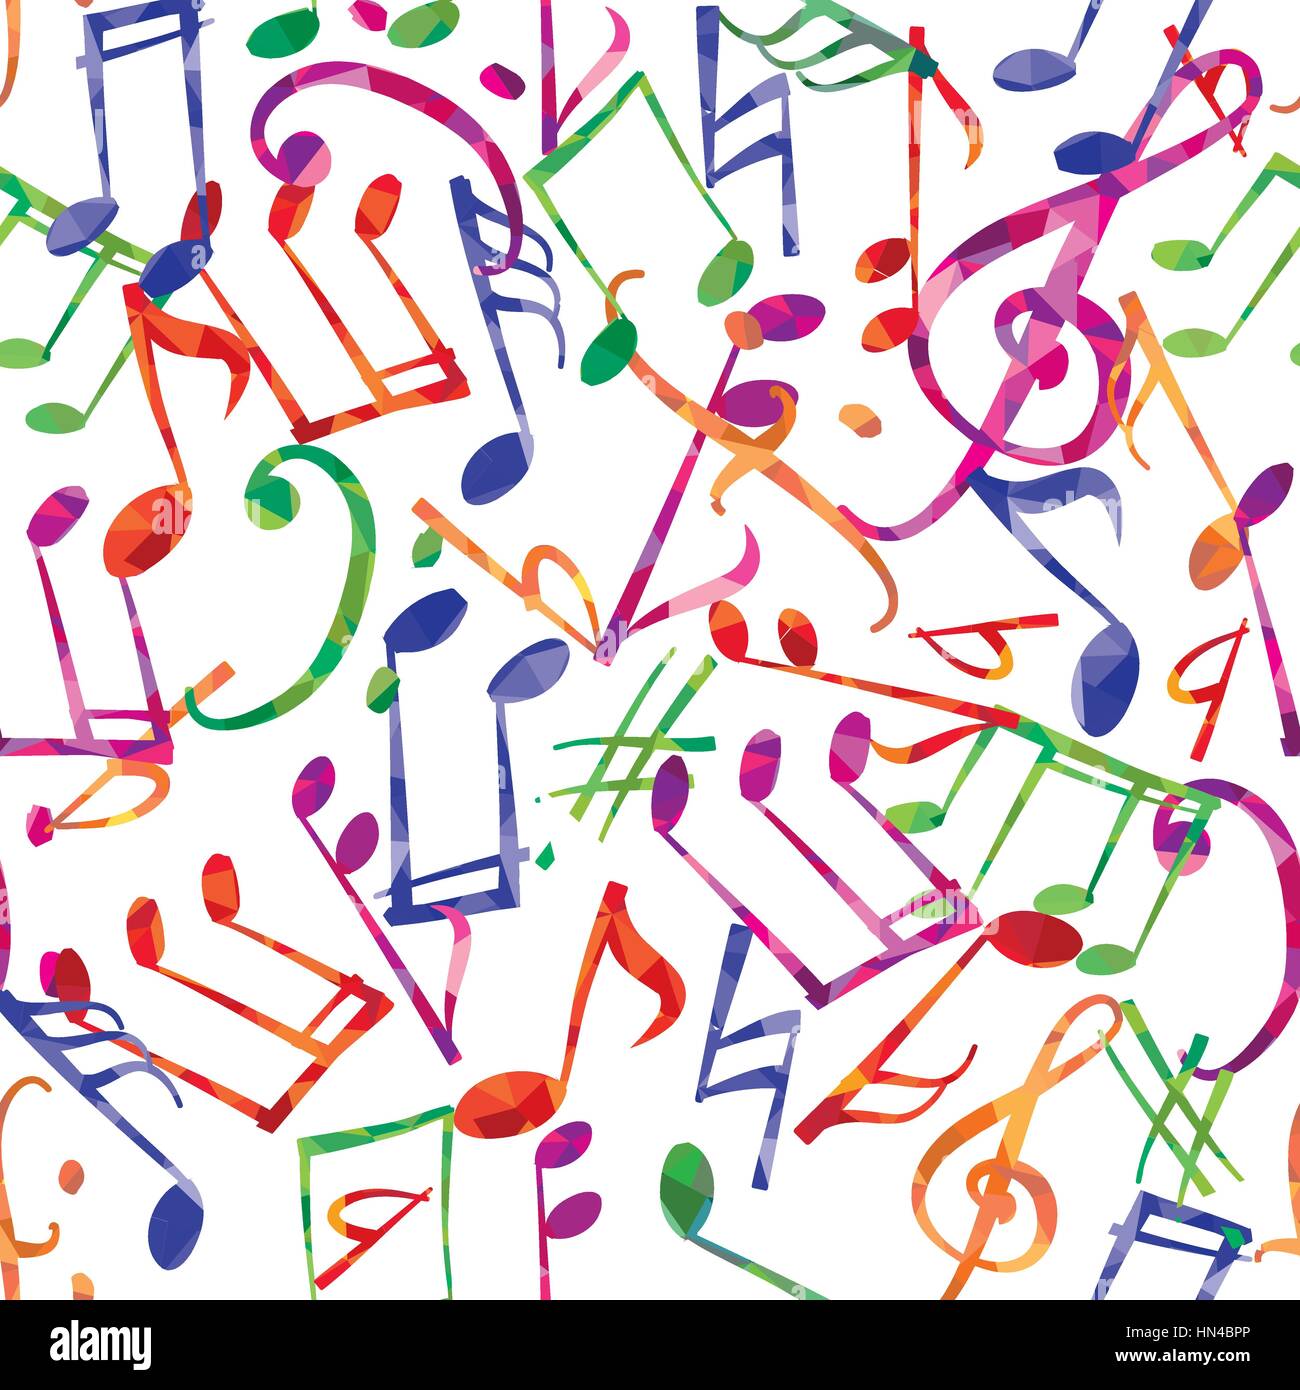 Music pattern. Music notes and signs seamless background Stock Vector